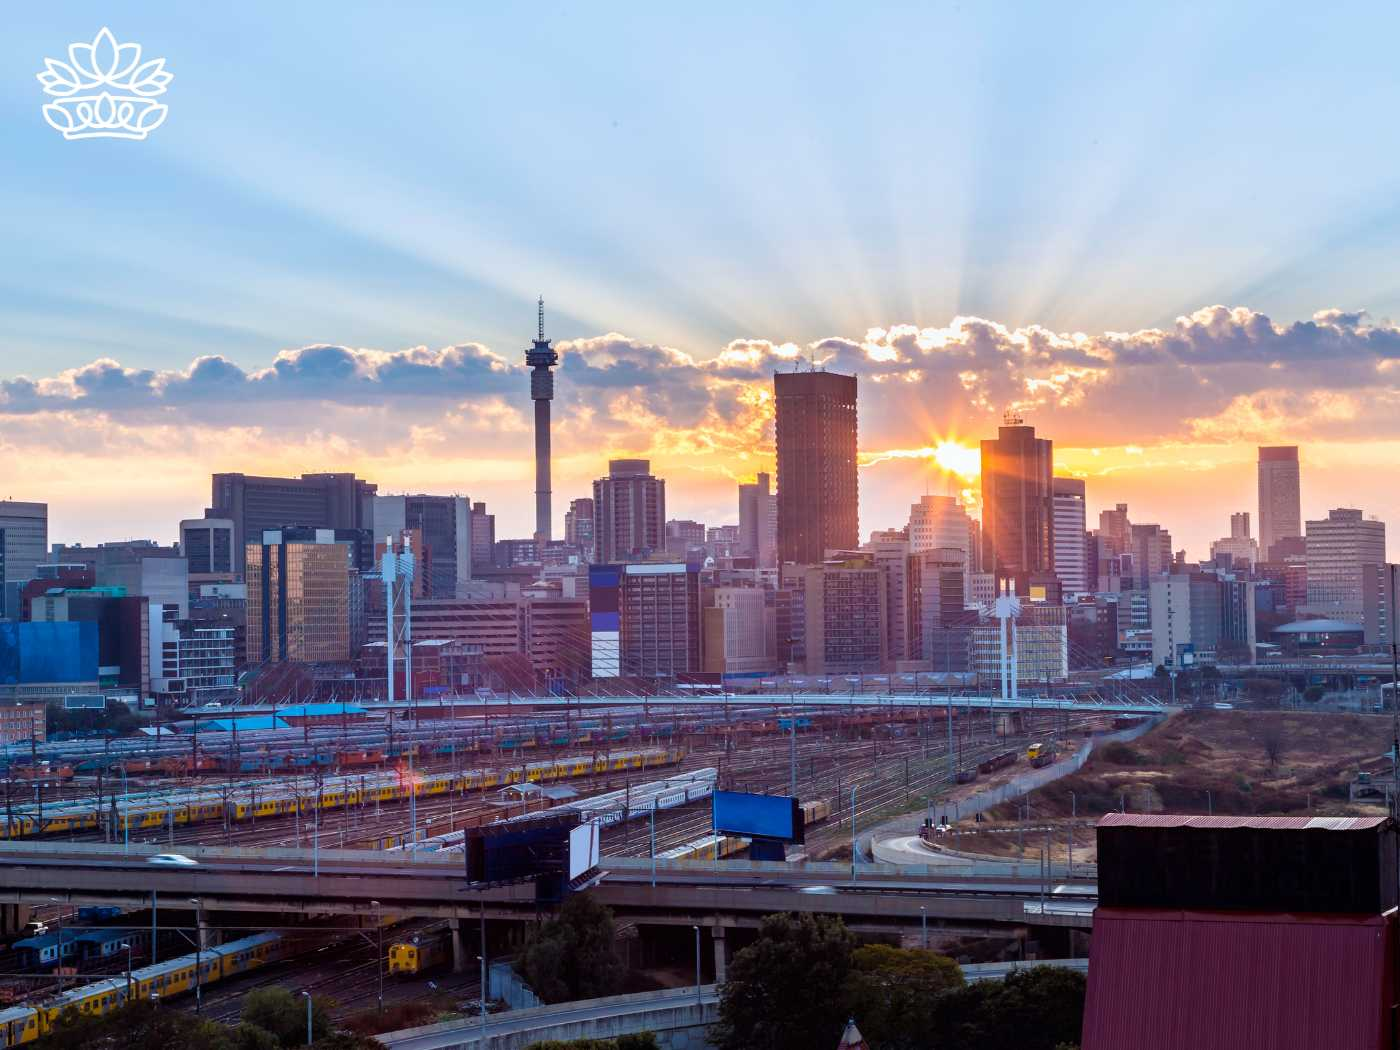 Radiant sunrise over the Johannesburg skyline, illustrating the city's dynamic energy and the promise of a new day. This cityscape is the backdrop for the Johannesburg Gift Delivery Collection, transforming ordinary moments into lovely occasions with birthday gifts, gift boxes, and hampers delivered right to your doorstep. Fabulous Flowers and Gifts.